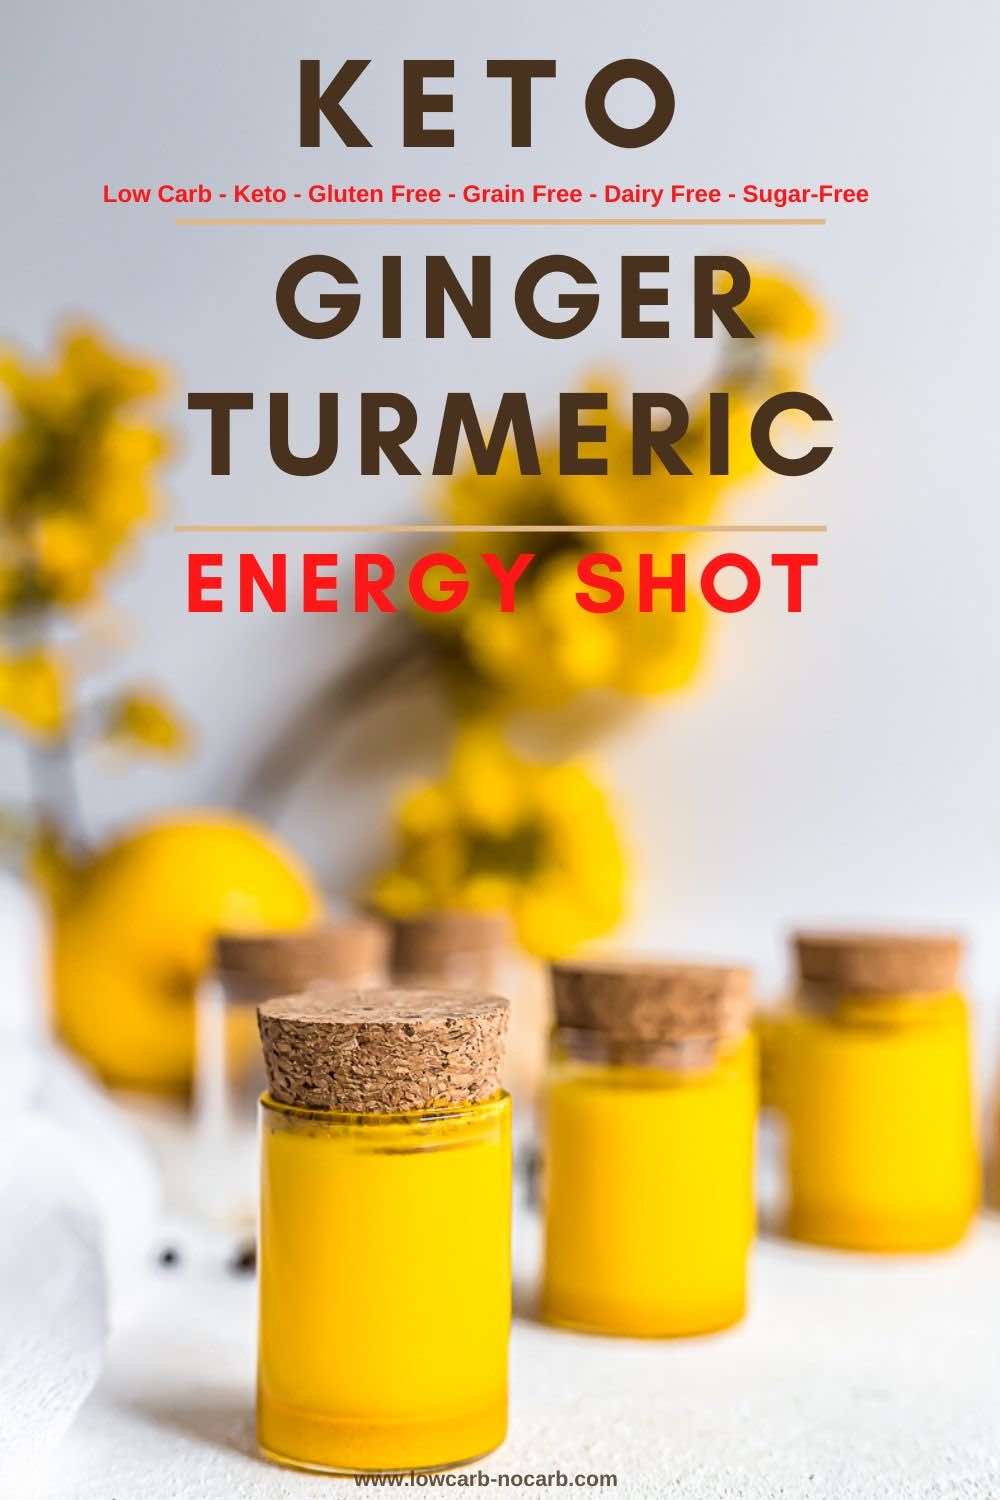 Wellness Shots made from Ginger and Turmeric